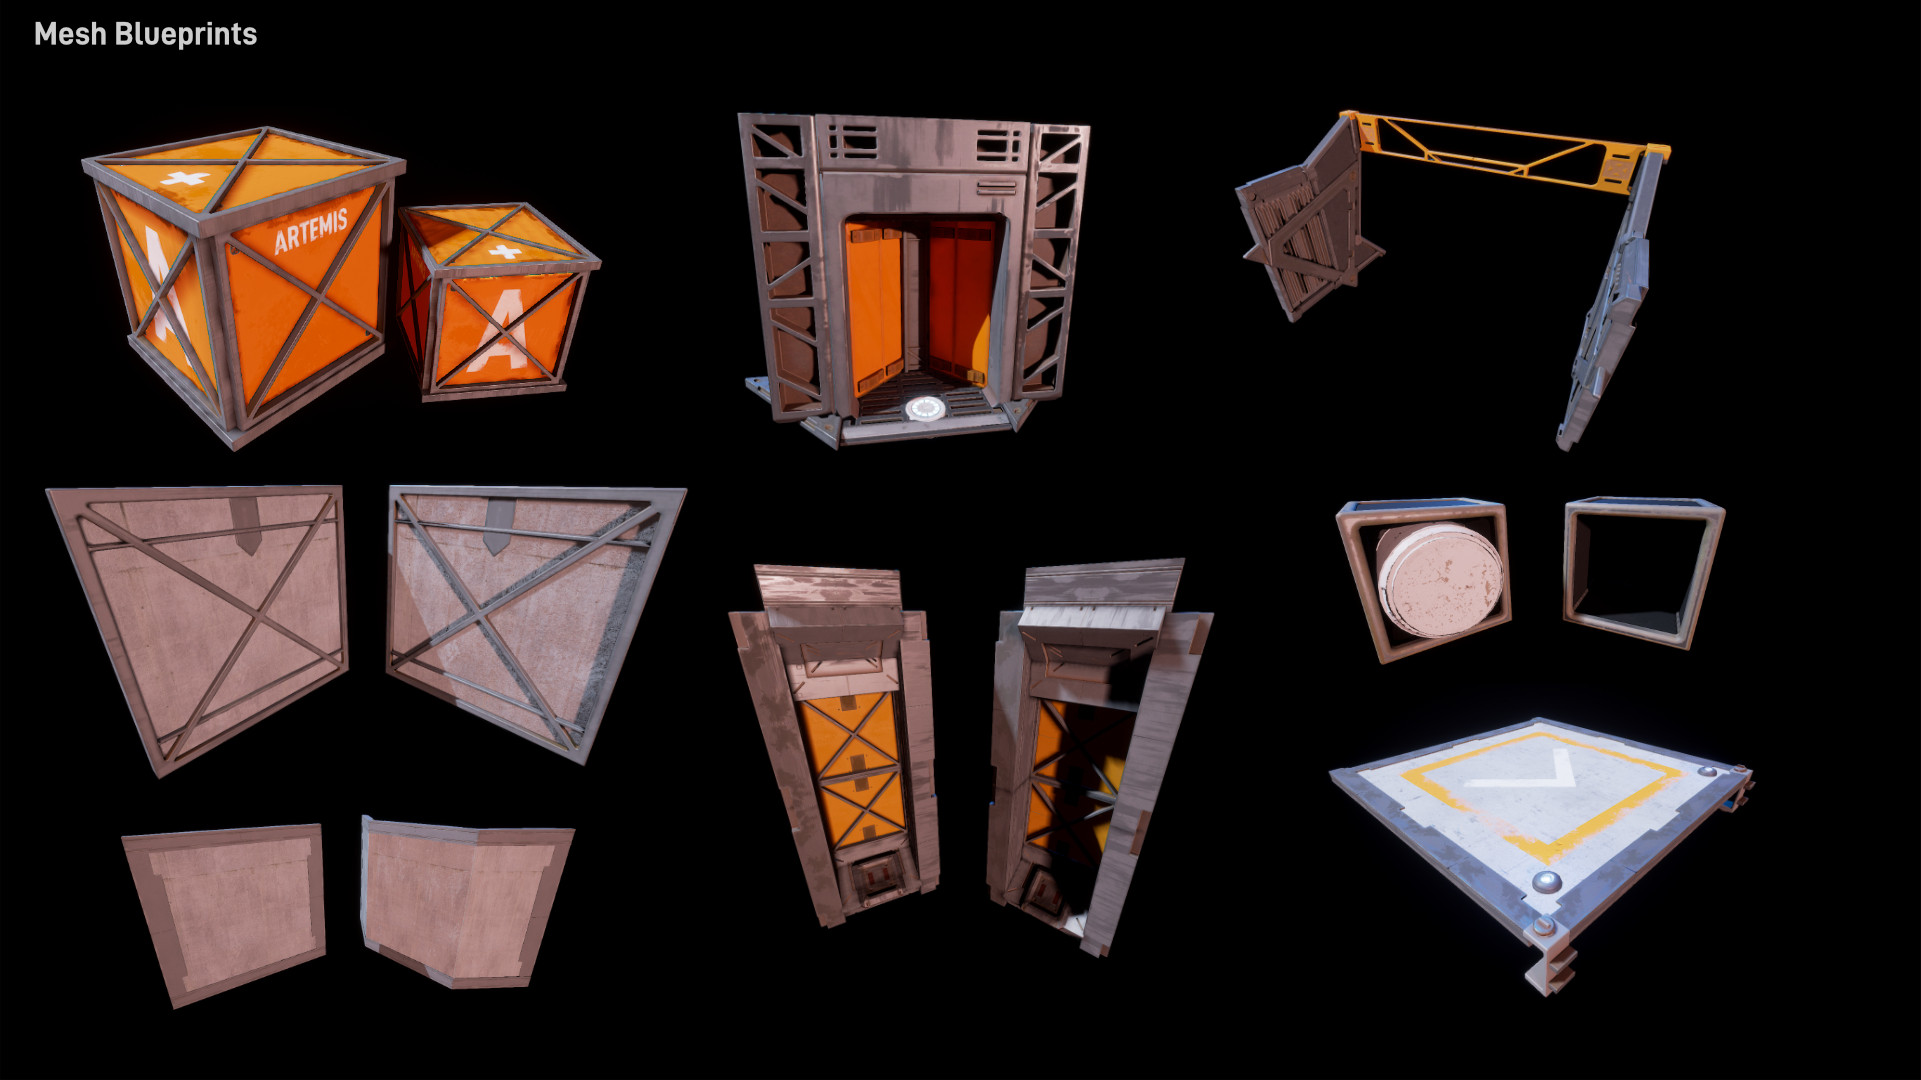 Static mesh blueprints made for ease of environment construction and editability.